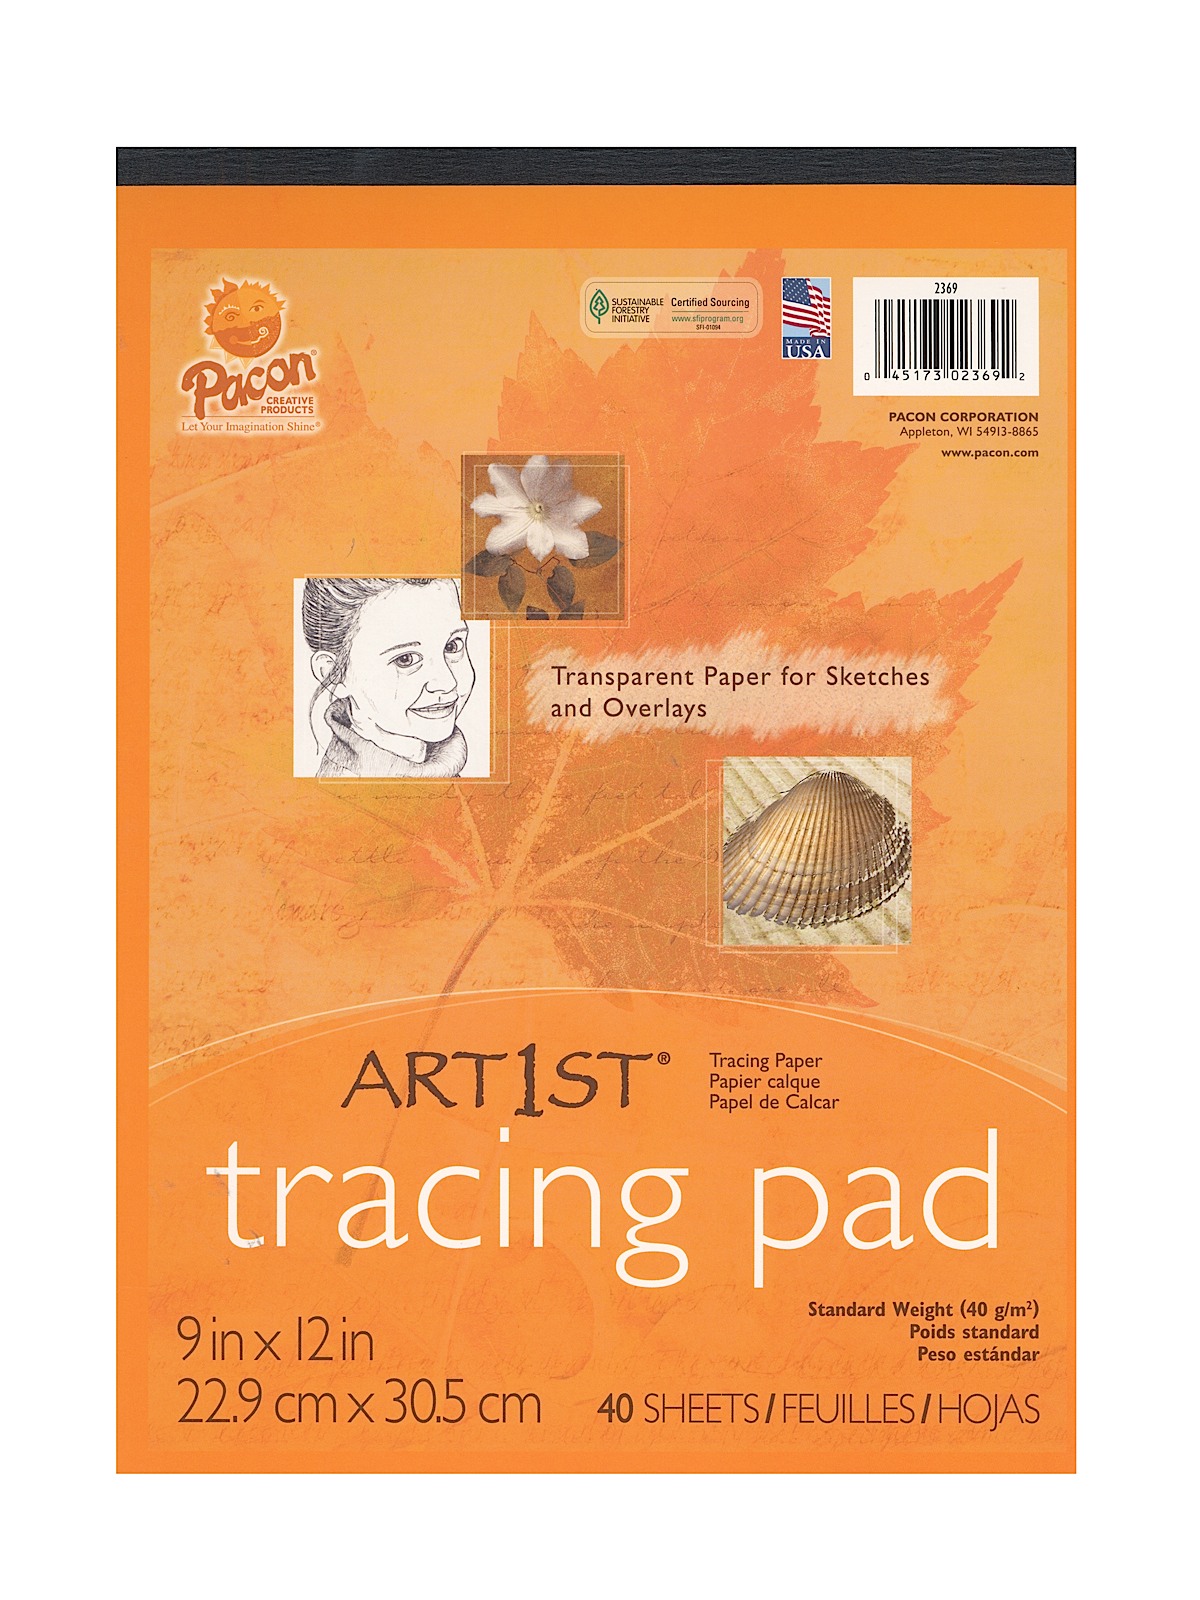 Art1st Tracing Paper Pads 9 In. X 12 In.